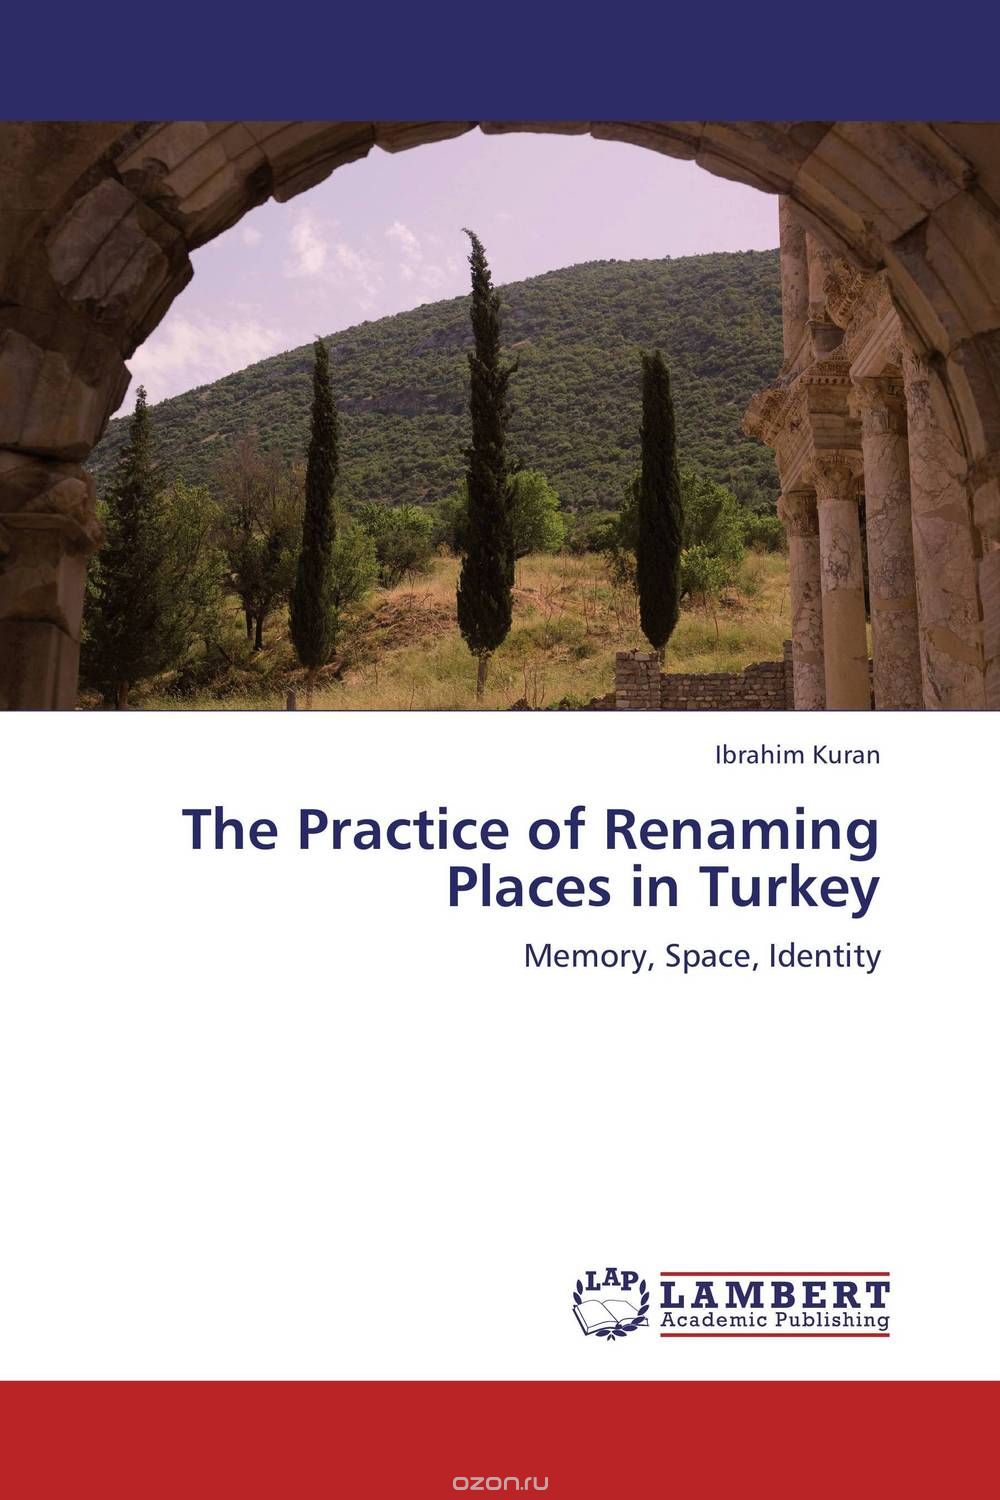 The Practice of Renaming Places in Turkey